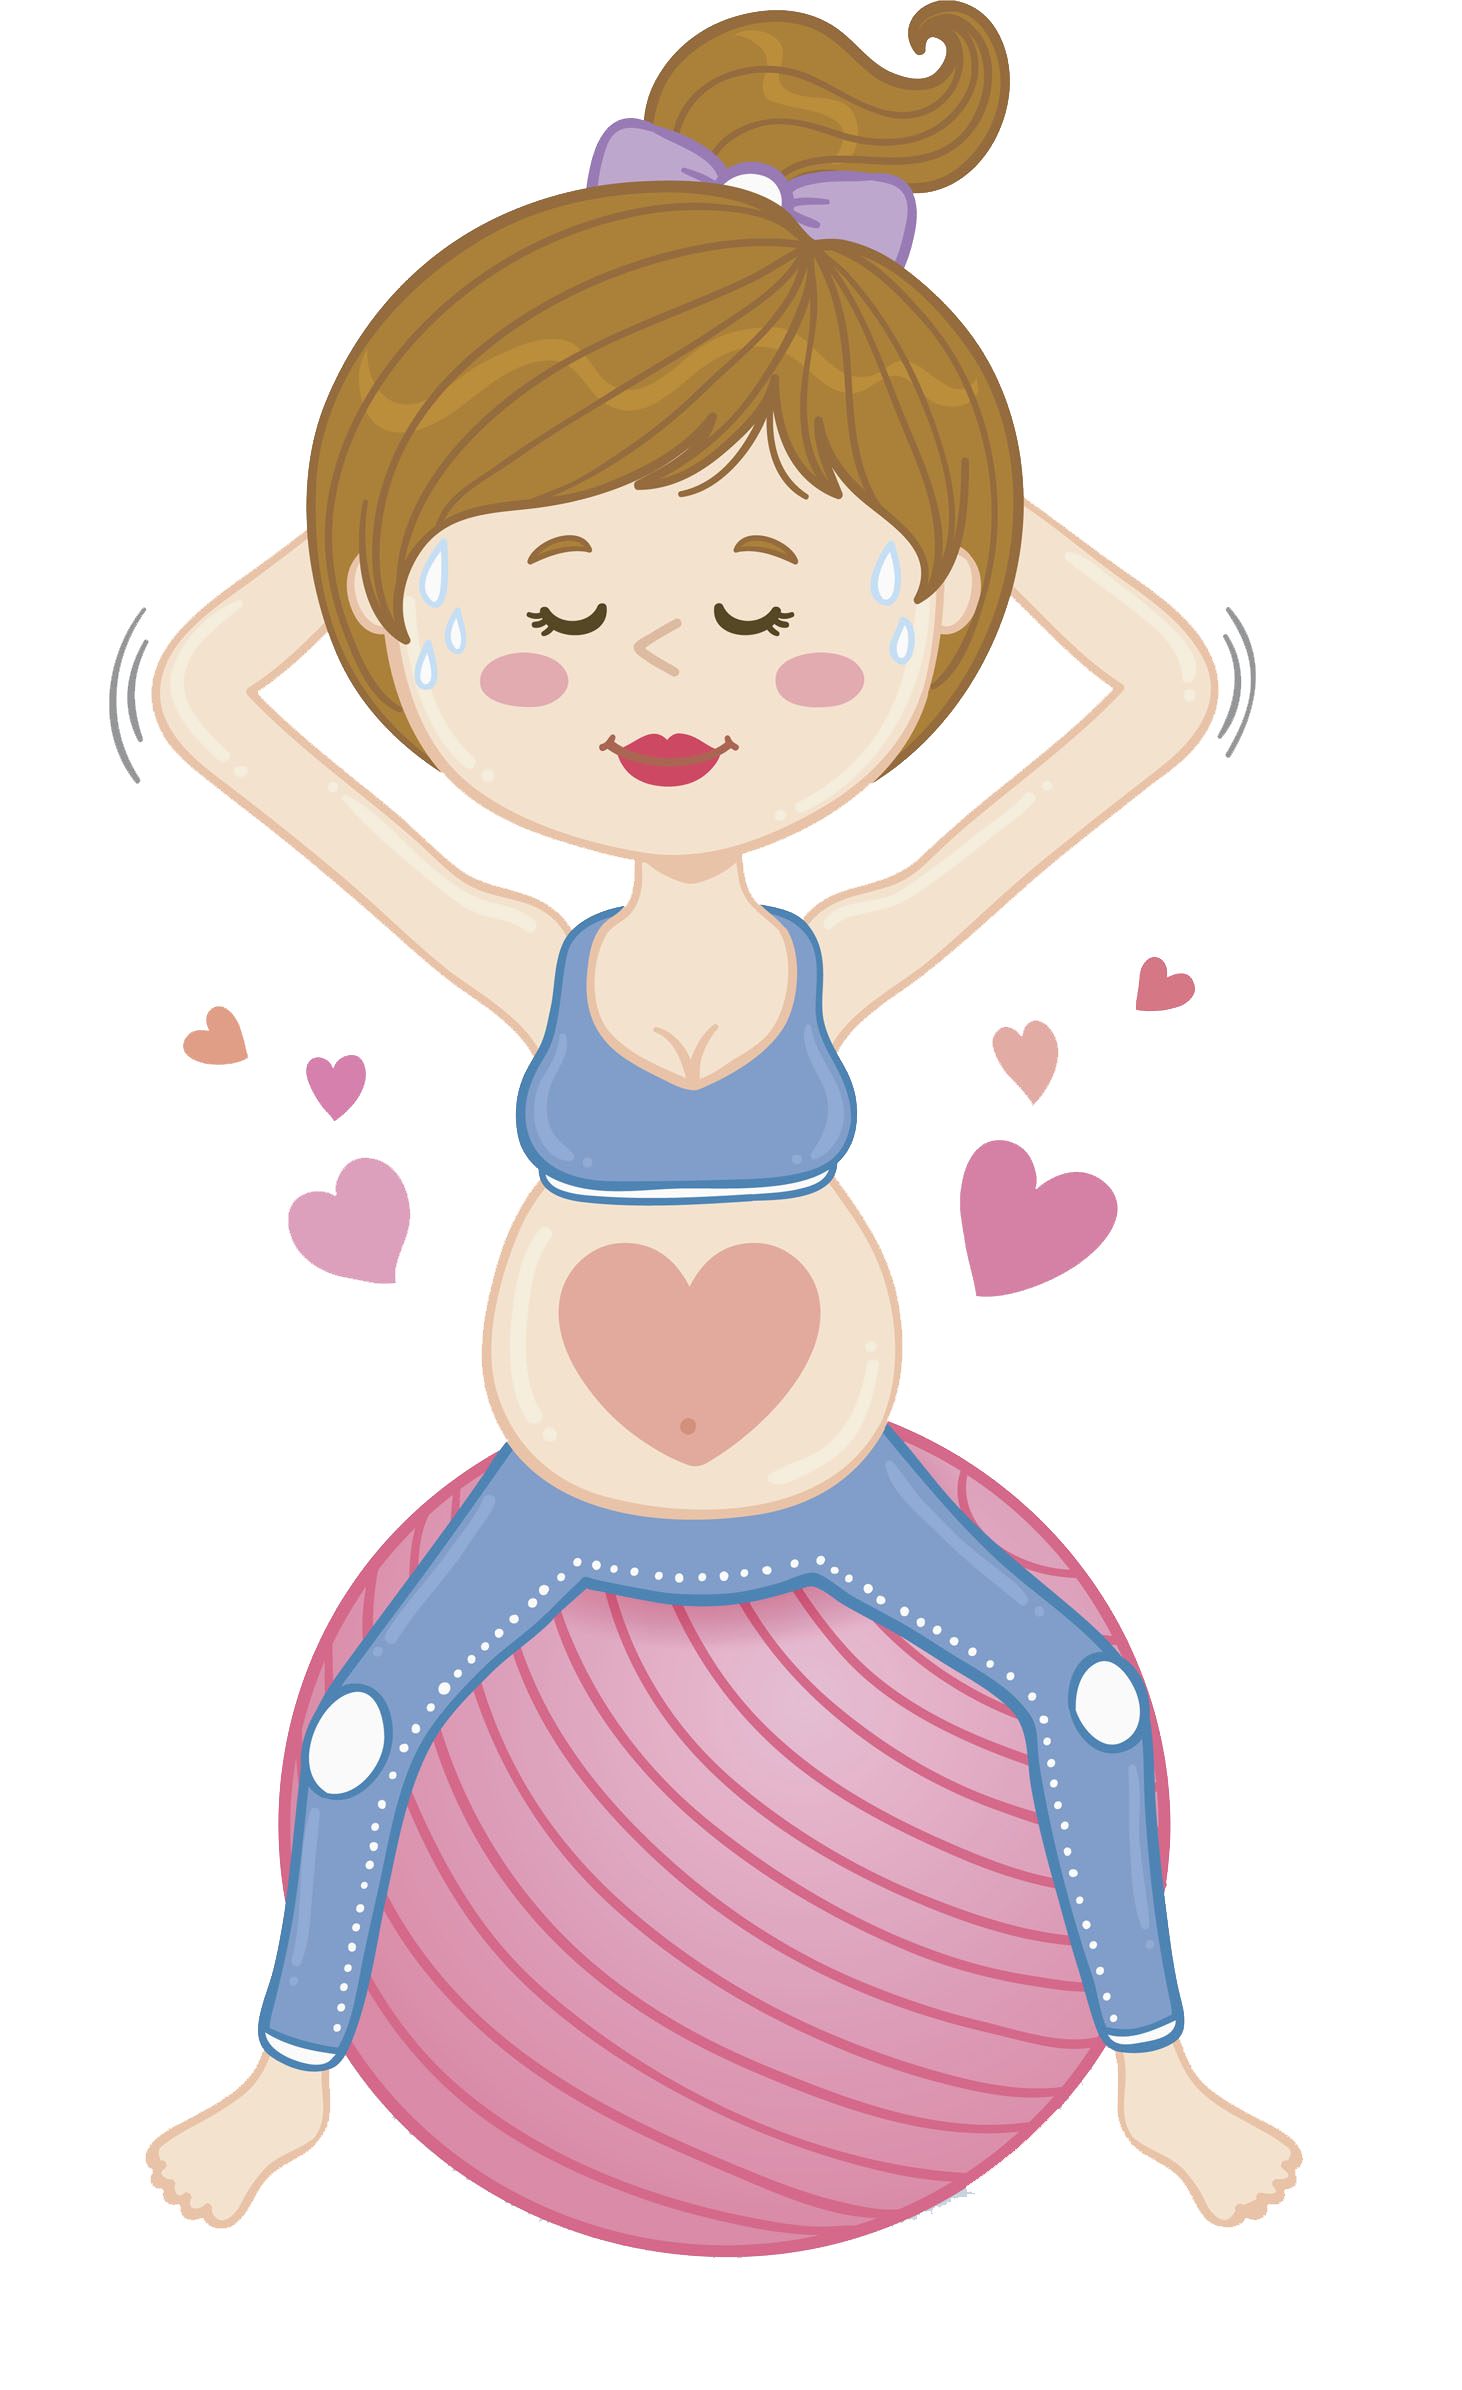 Pregnancy cartoon drawing woman. Exercise clipart balance exercise